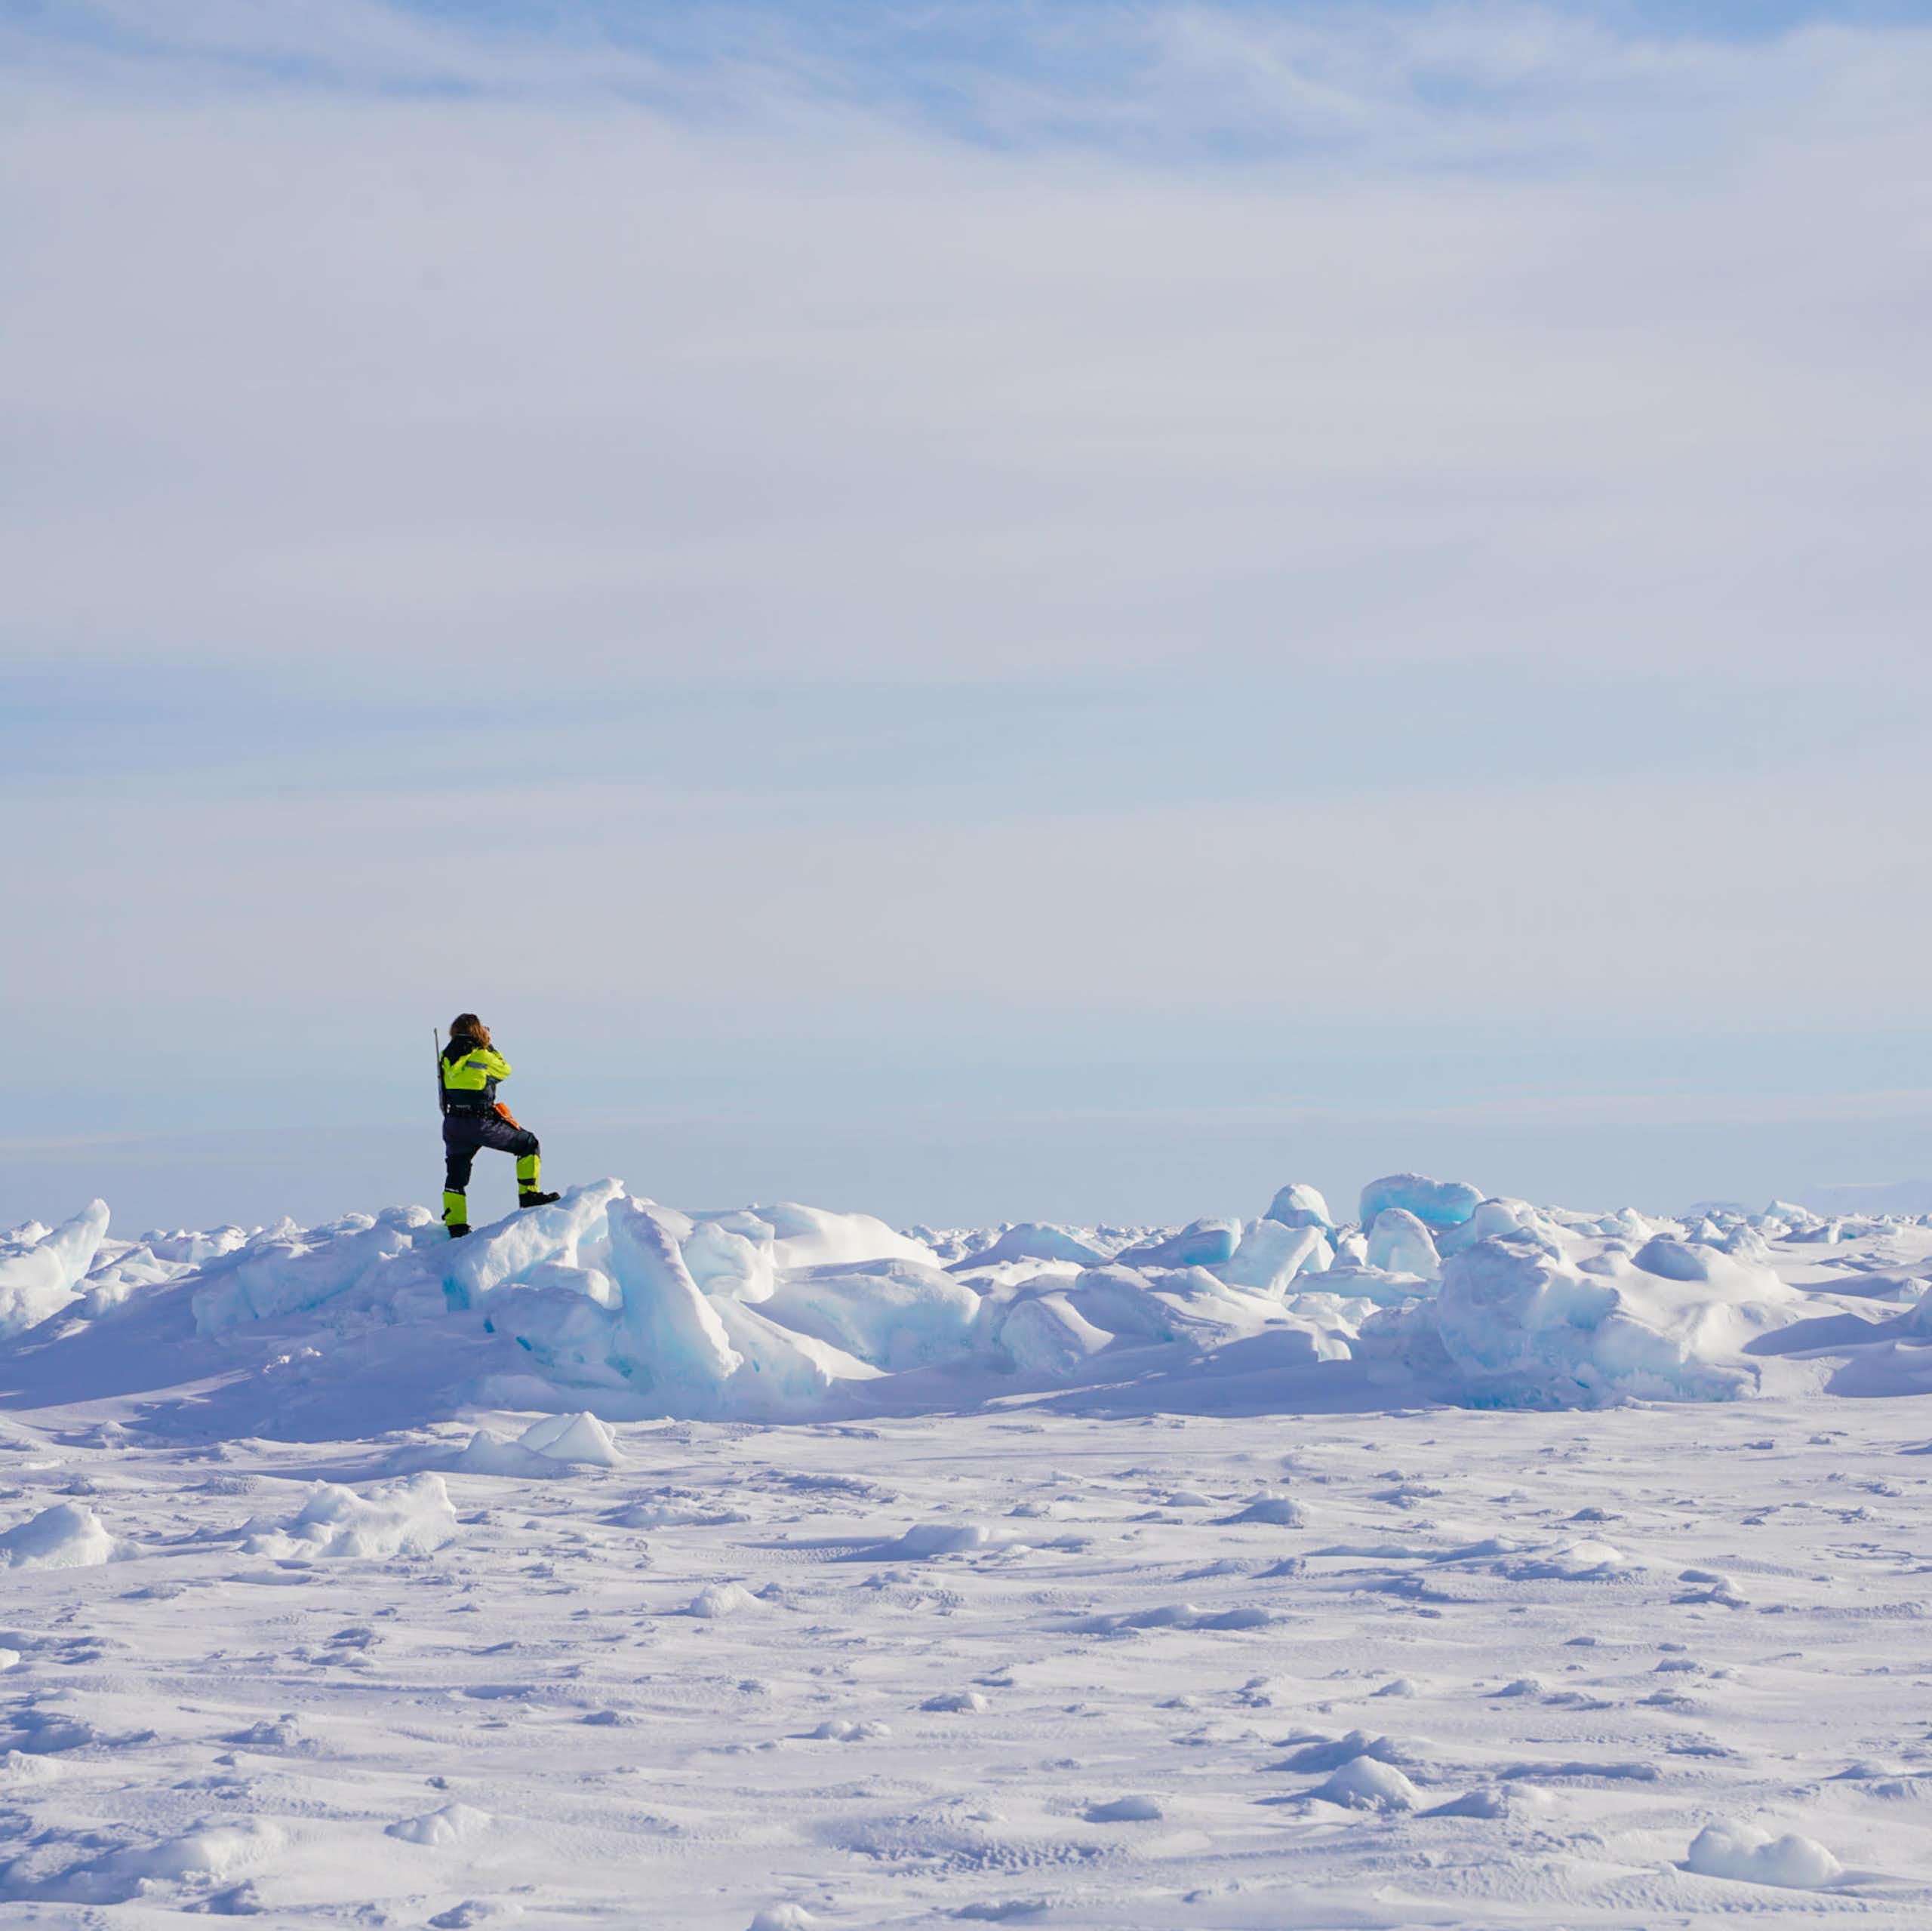 A figure in high vis outfit standing on an icy field